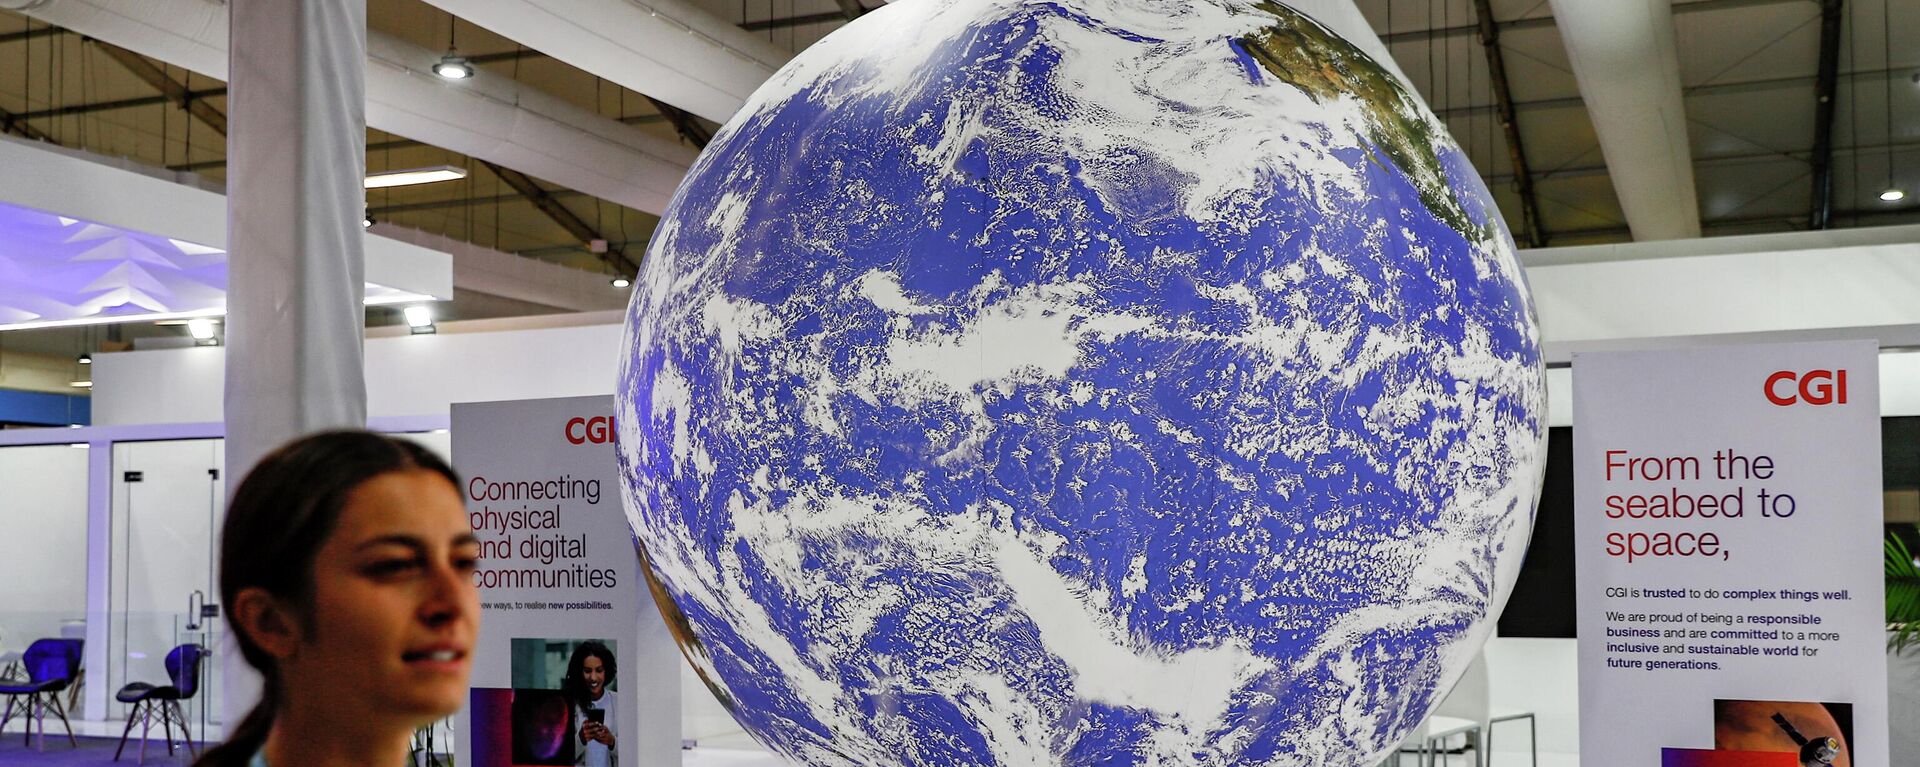 A participant walks past a mockup of the planet Earth globe at the Sharm el-Sheikh International Convention Centre, on the first day of the COP27 climate summit, in Egypt's Red Sea resort city of Sharm el-Sheikh, on November 6, 2022. - Sputnik International, 1920, 06.11.2022